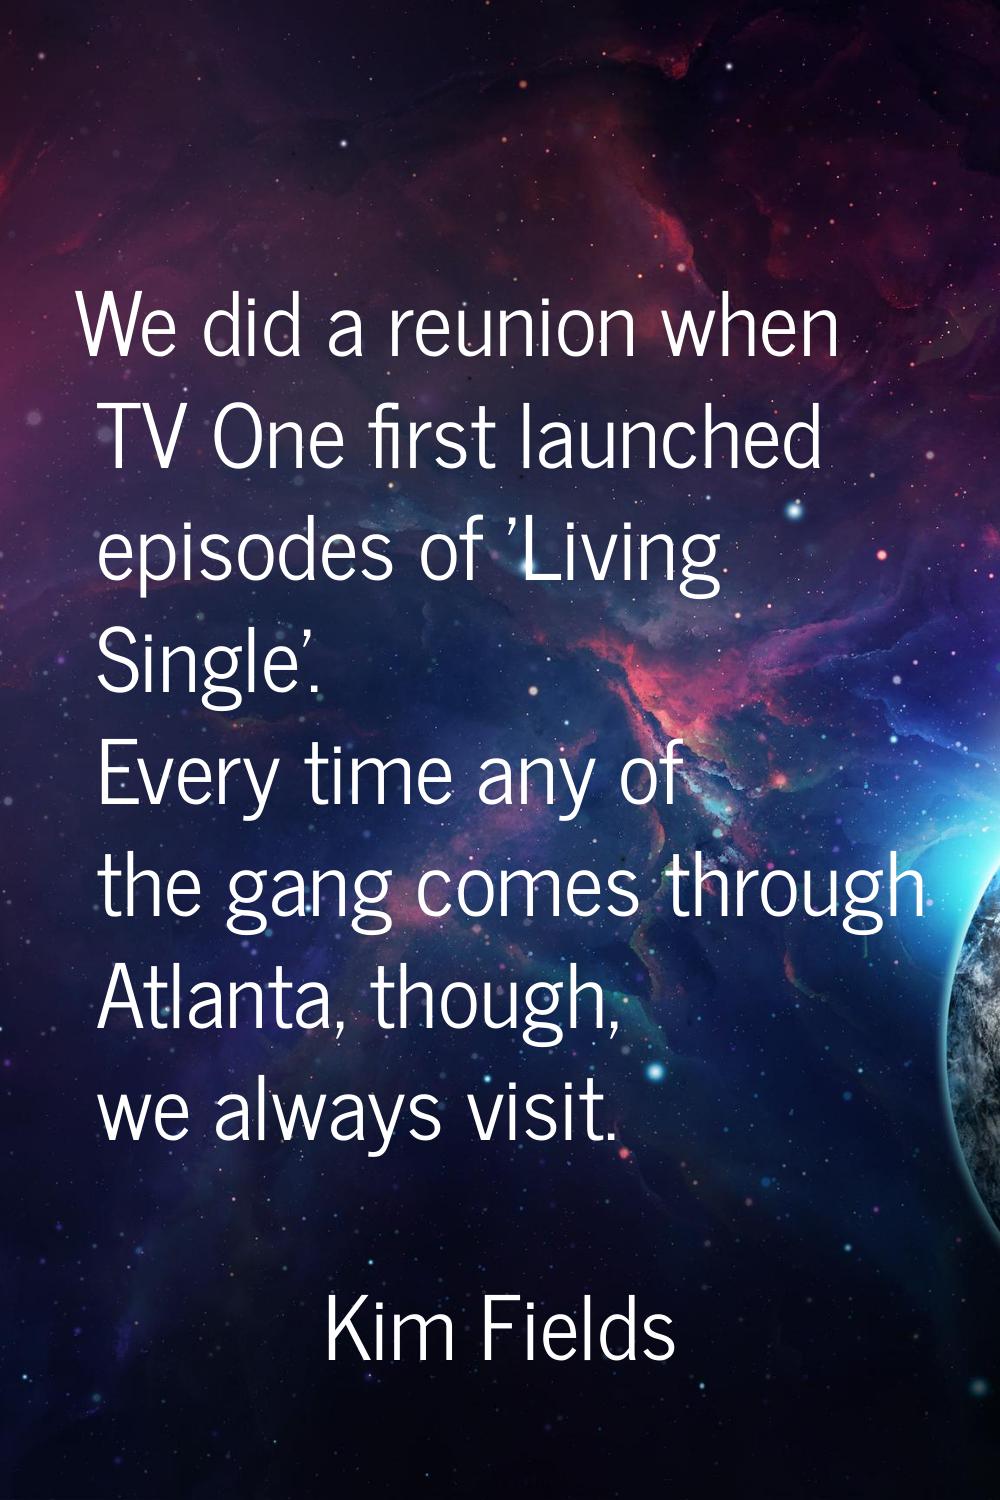 We did a reunion when TV One first launched episodes of 'Living Single'. Every time any of the gang